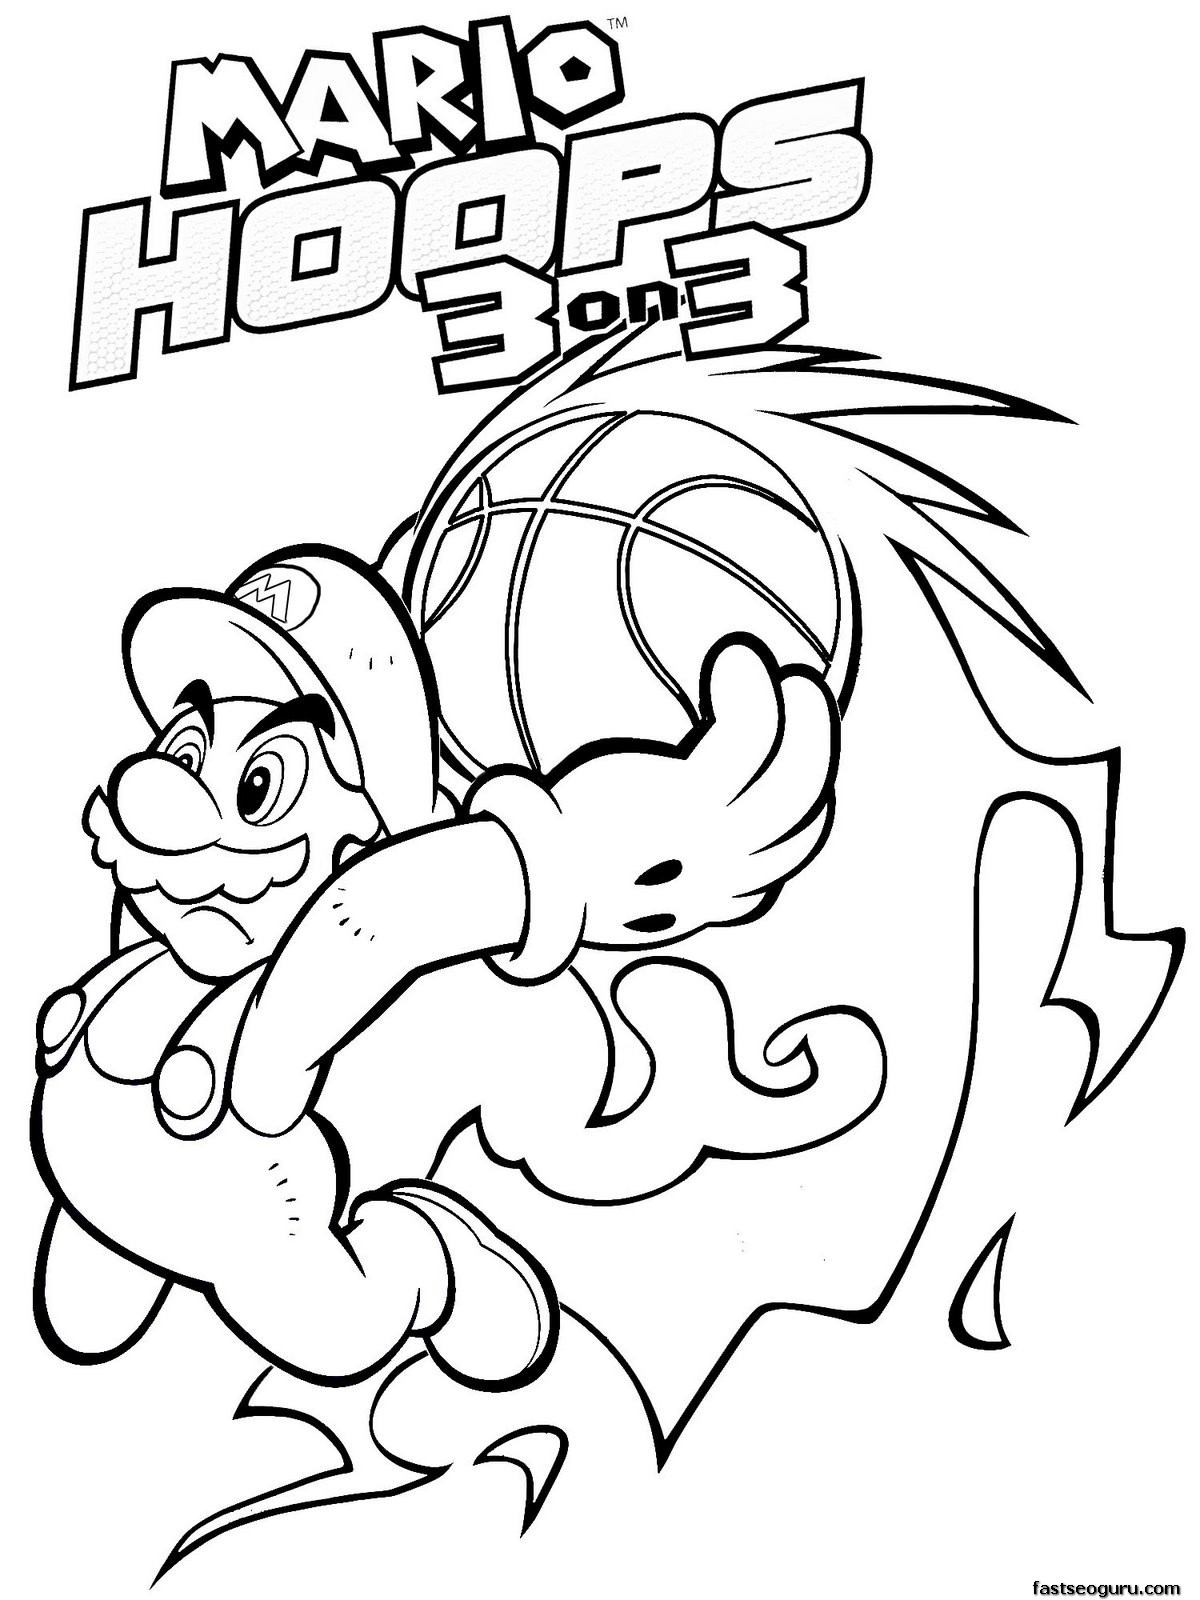 Printable Super Mario world coloring pages - Printable Coloring Pages